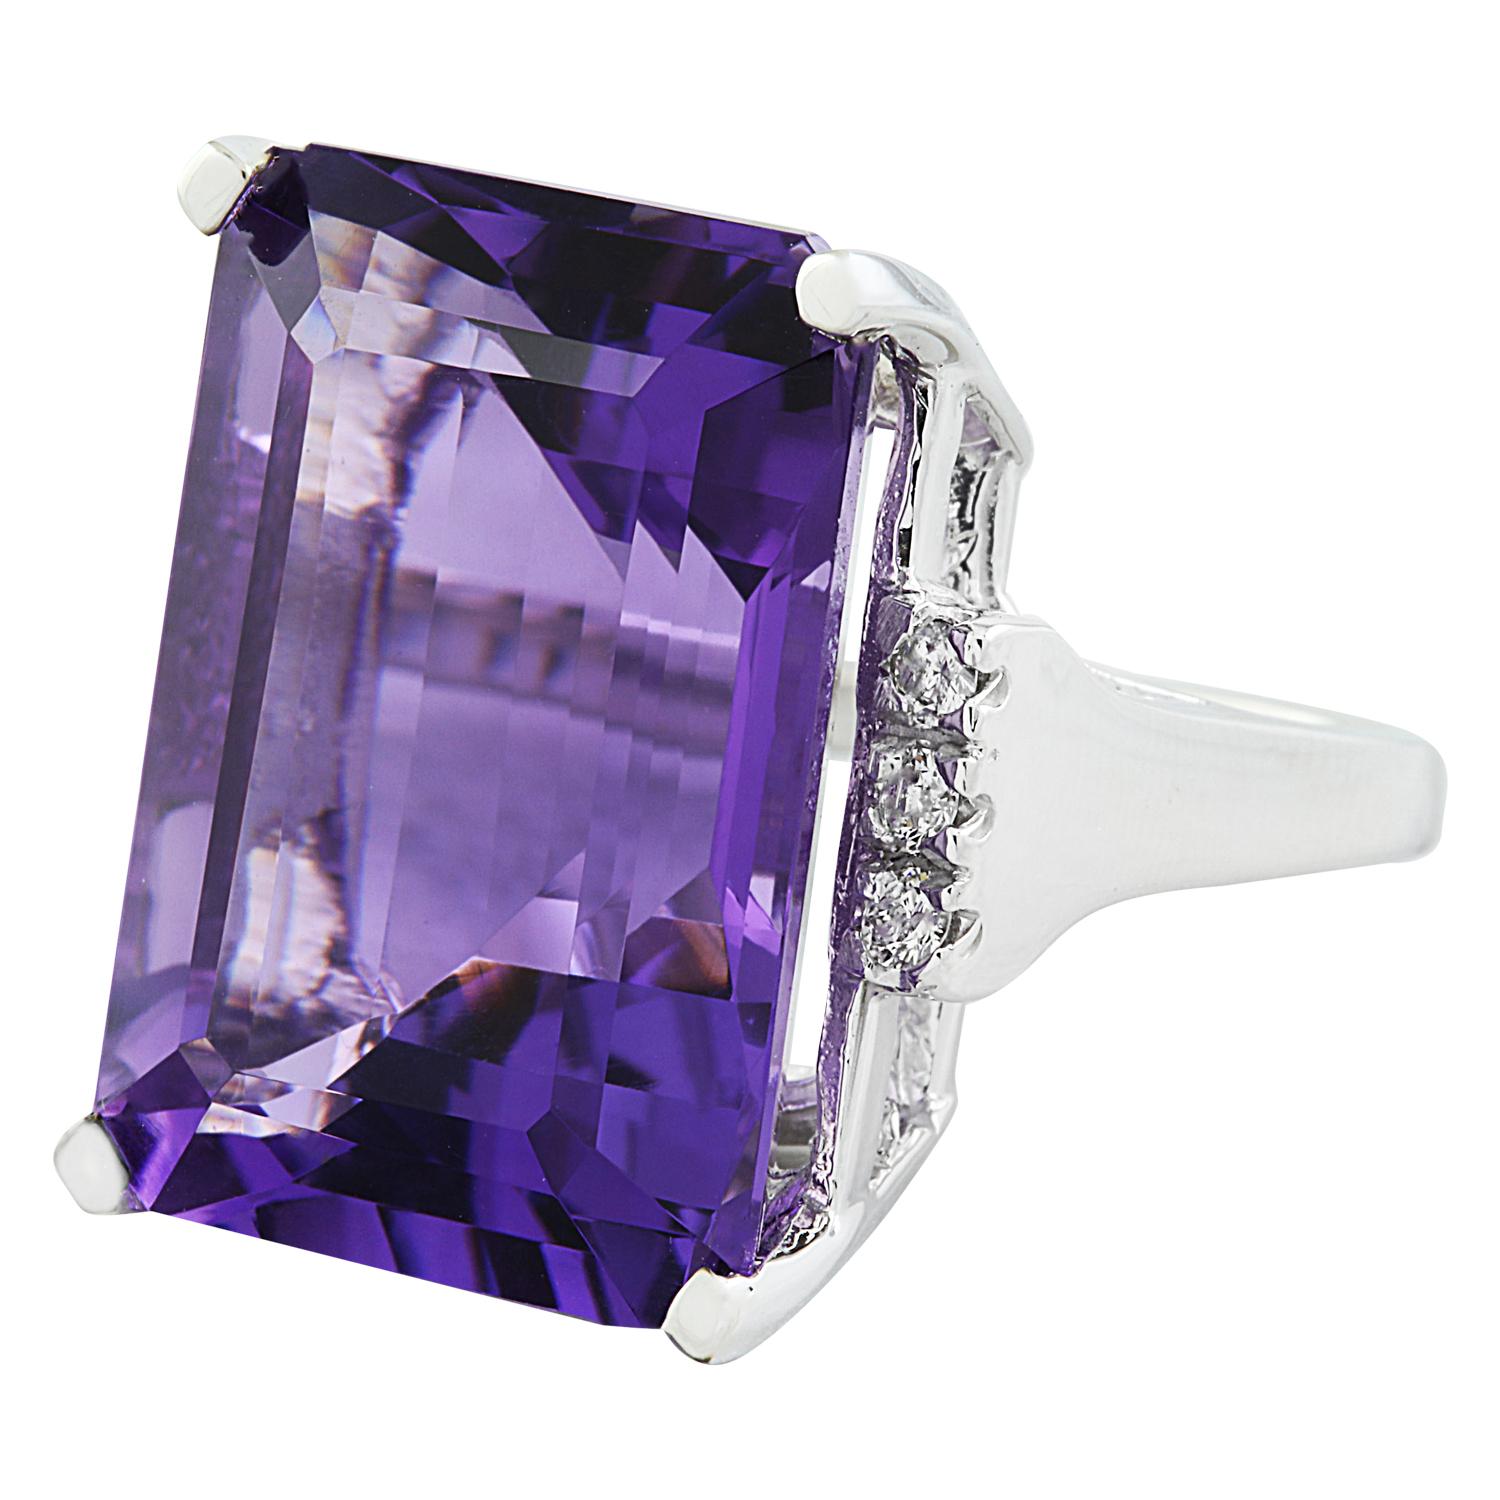 30.25 Carat Natural Amethyst 14 Karat Solid White Gold Diamond Ring
Stamped: 14K
Total Ring Weight: 11.7 Grams 
Amethyst Weight 30.00 Carat (22.00x16.00 Millimeters)
Diamond Weight: 0.25 Carat (F-G Color, VS2-SI1 Clarity )
Quantity: 6
Face Measures: